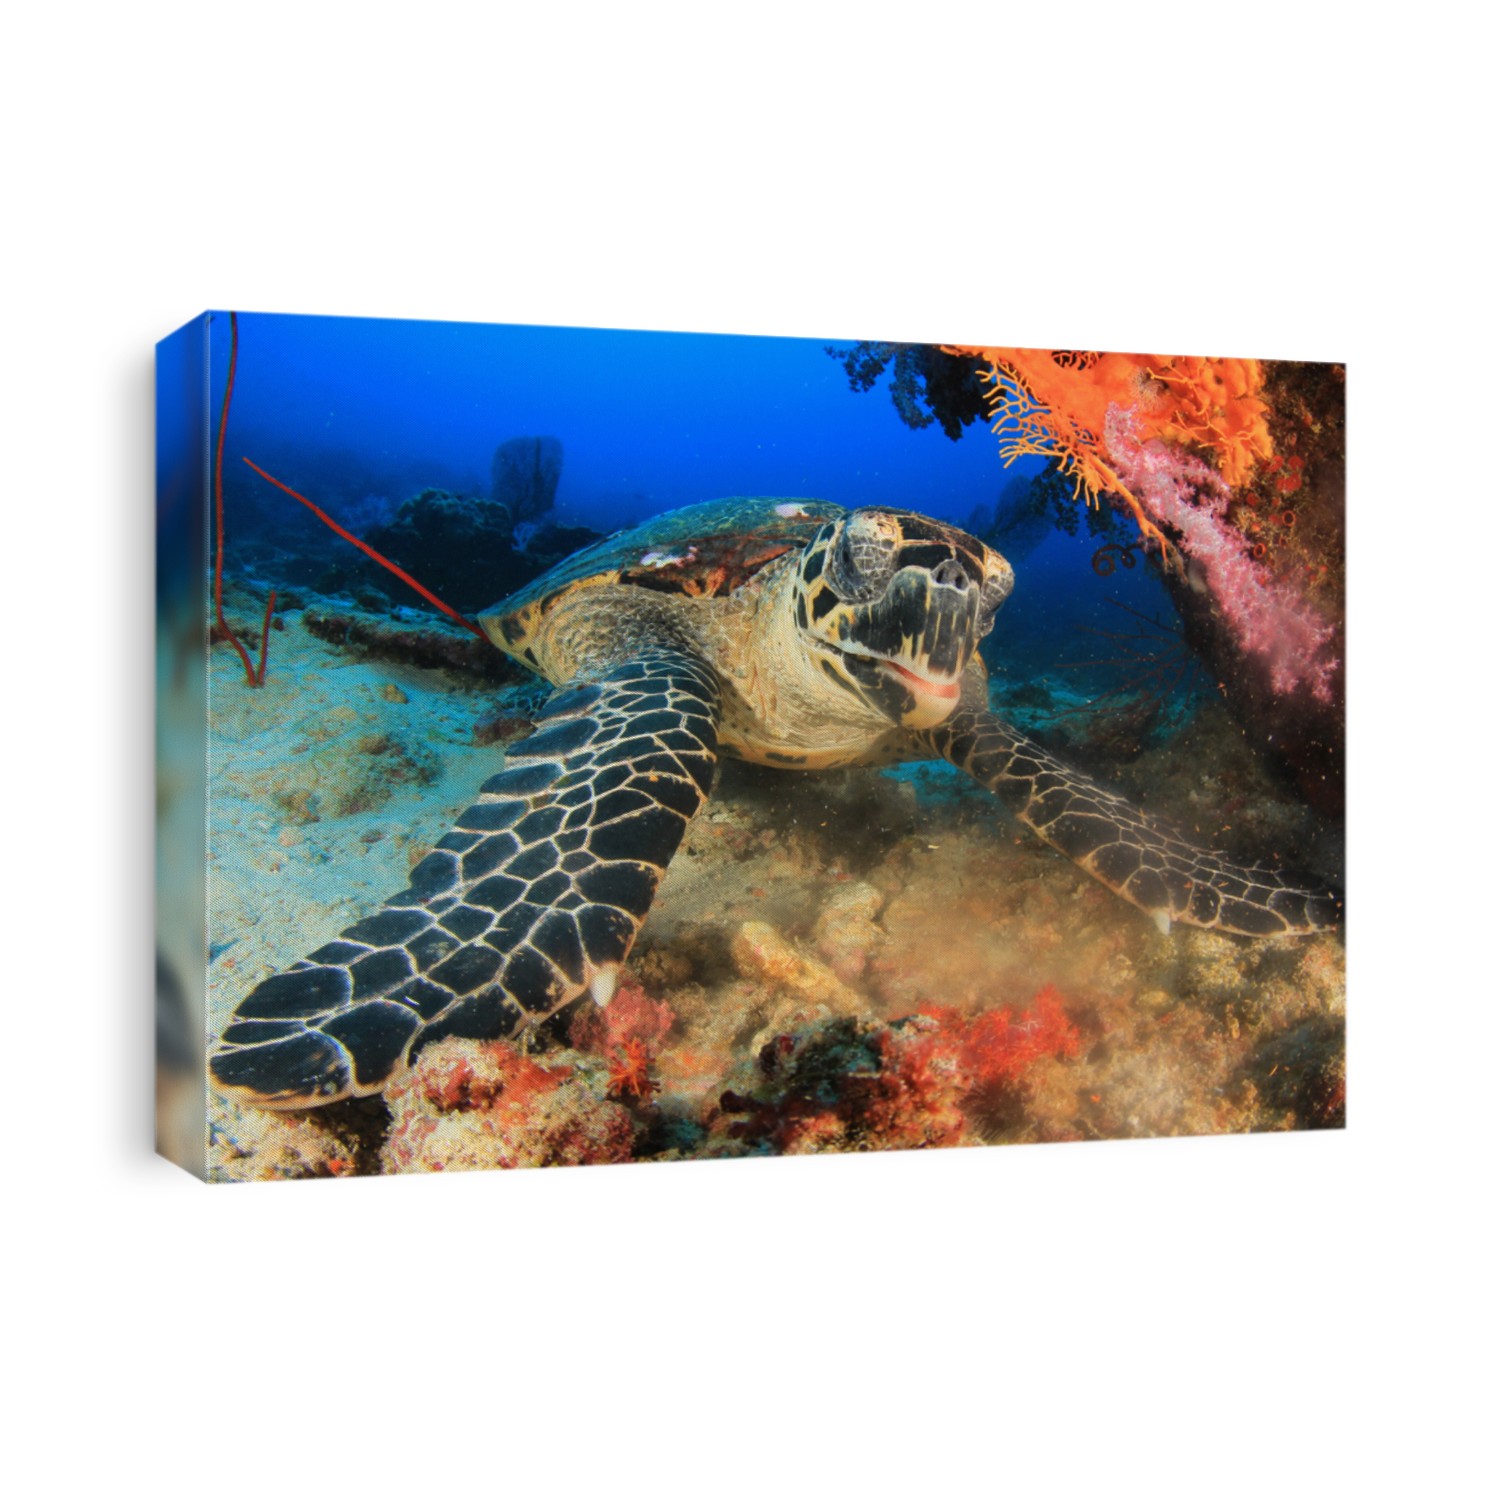 Hawksbill Turtle eating coral